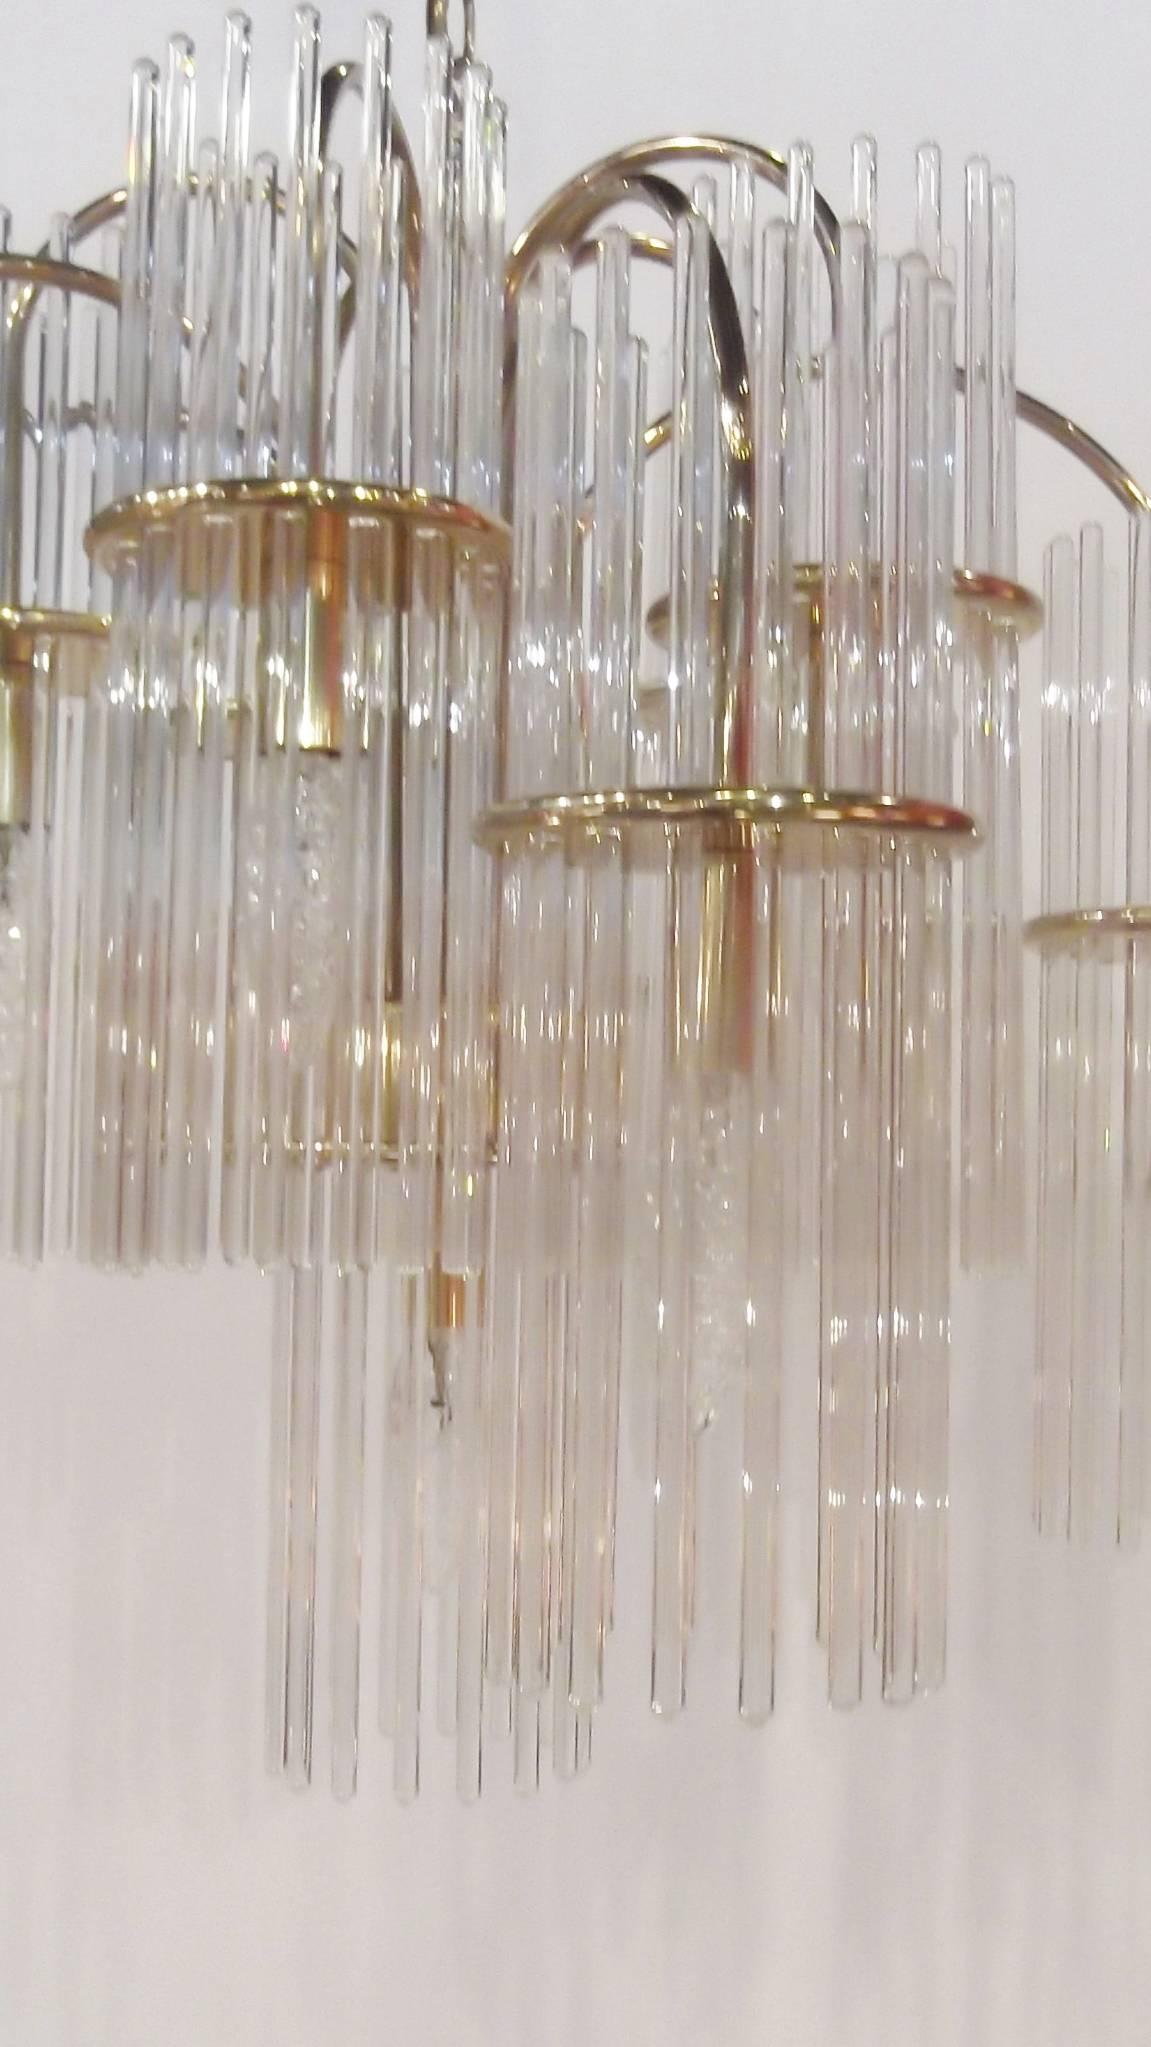 Gaetano Sciolari chandelier for lightolier. This is a classic glass rod hanging fixture with brass arms. A total of 11 lights. This chandelier is very balanced and all in excellent condition.